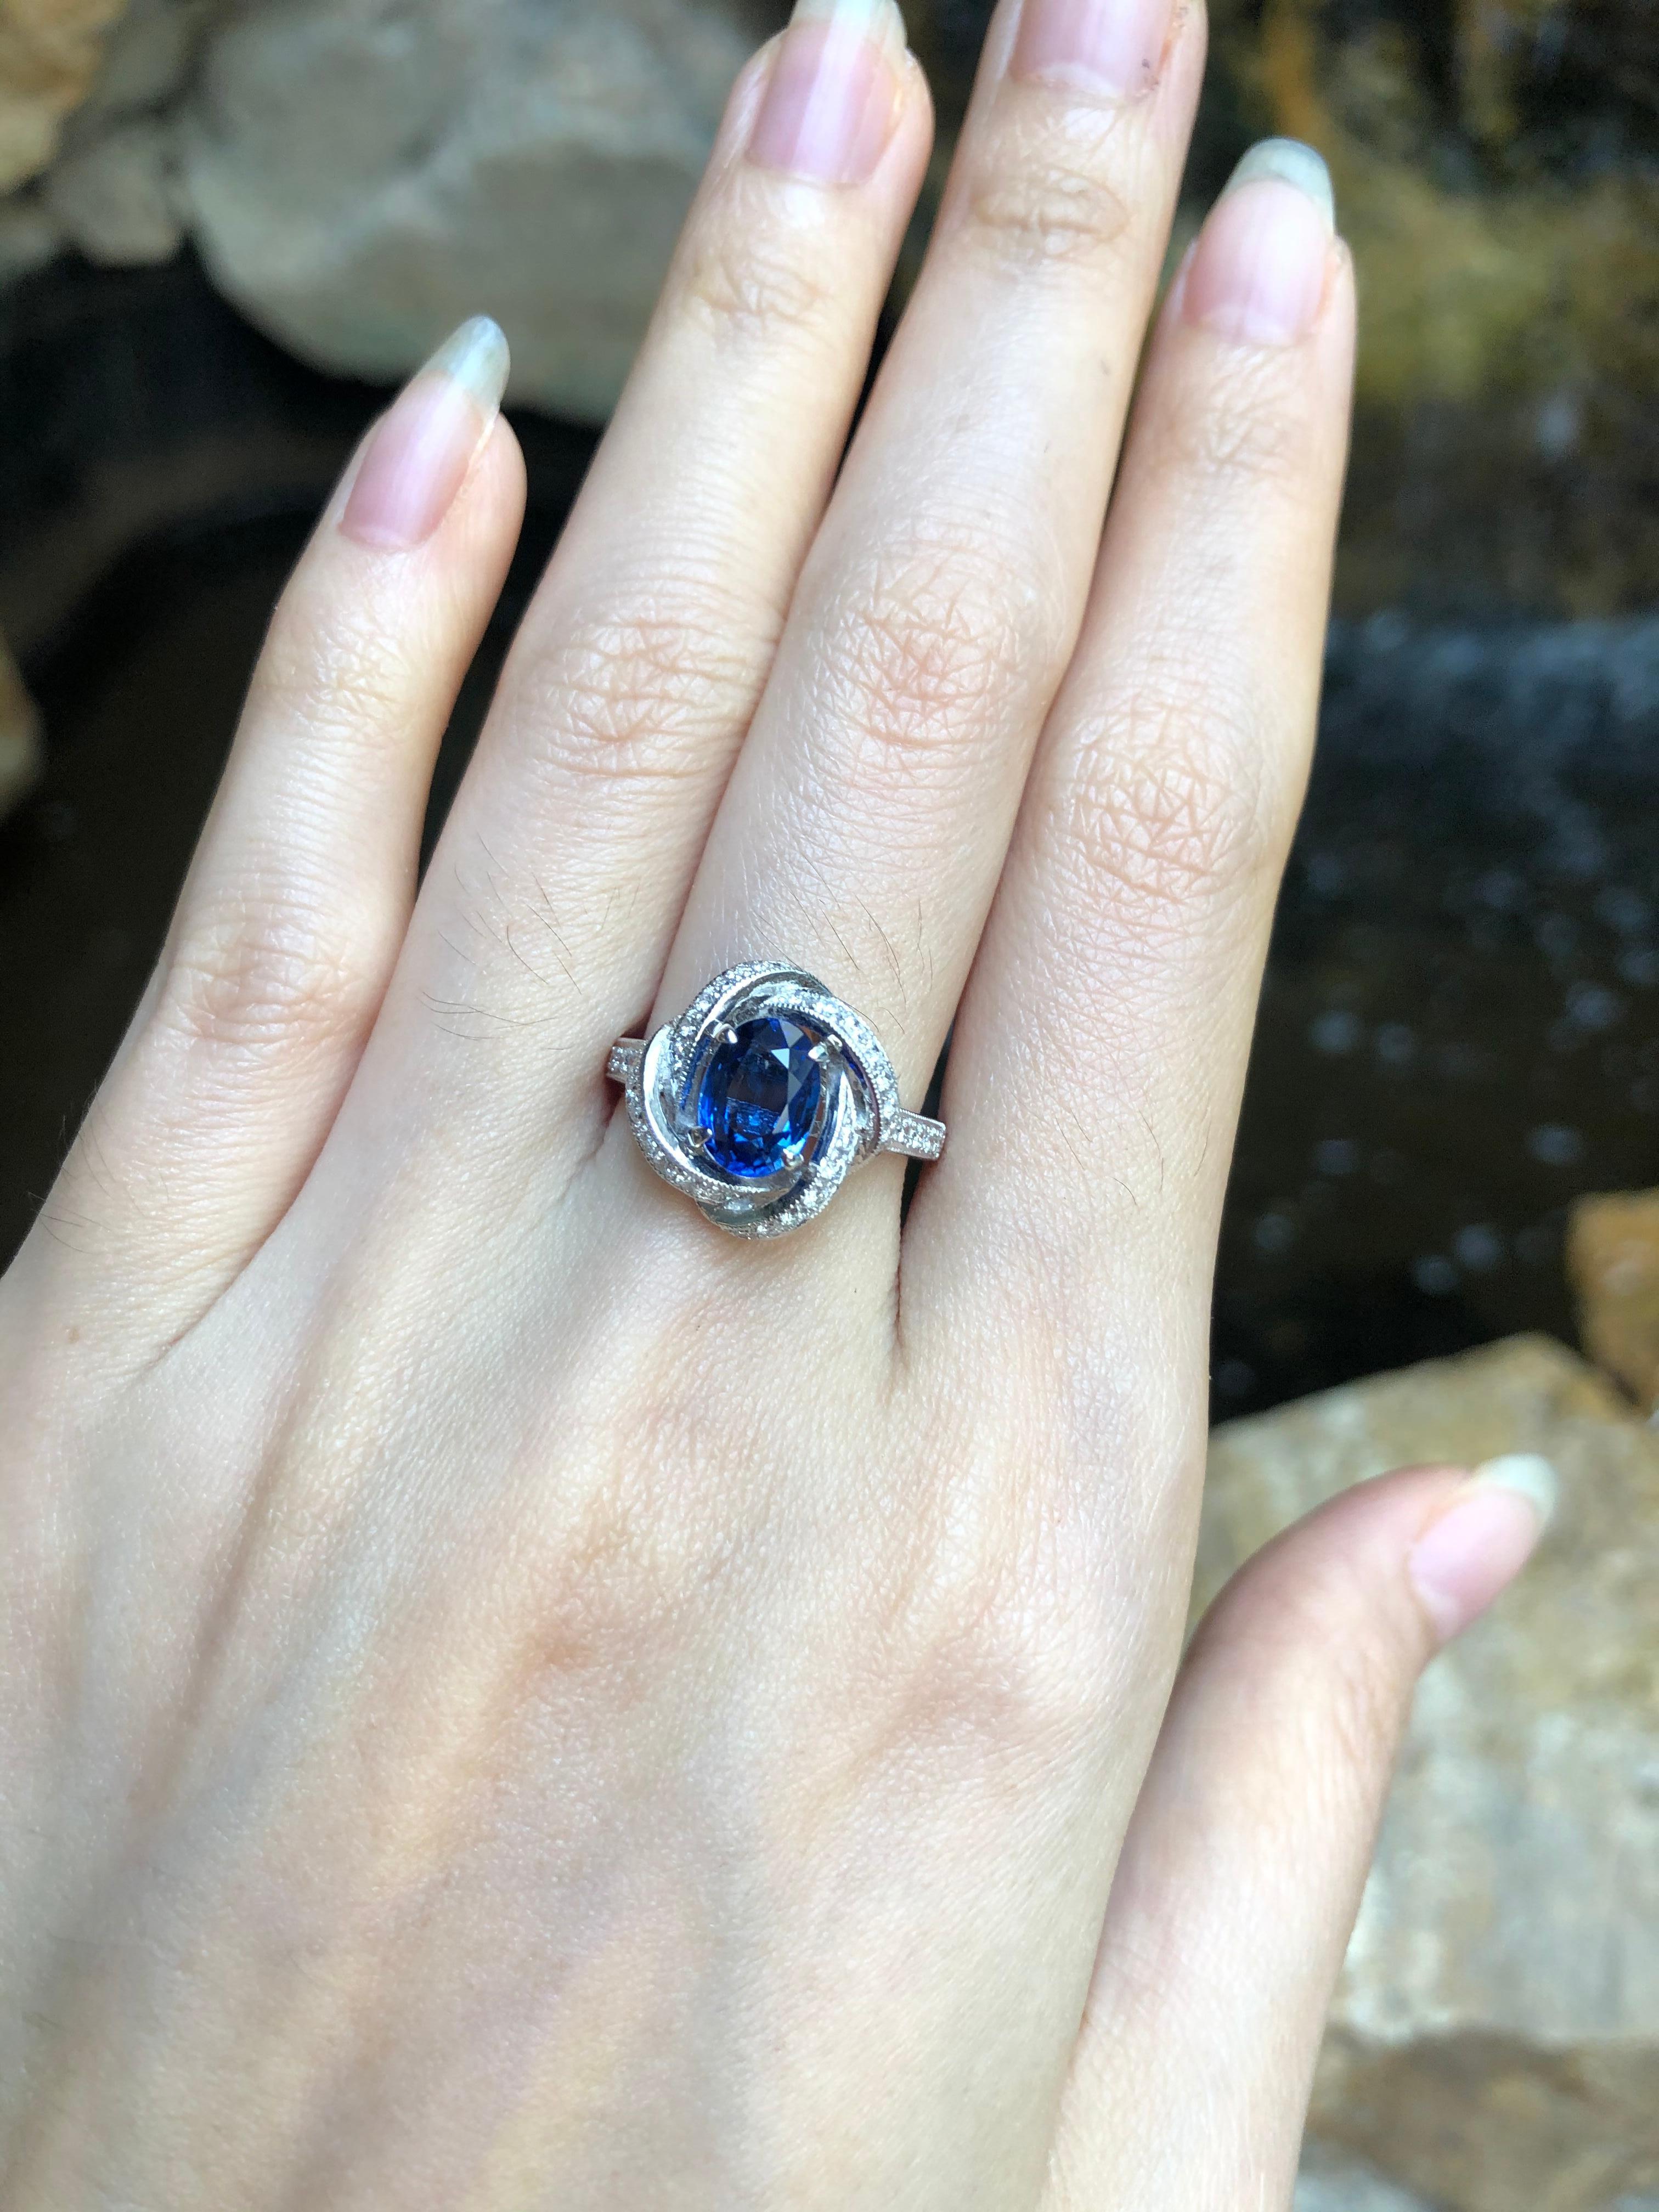 Blue Sapphire 1.70 carats with Diamond 0.44 carat Ring set in 18 Karat White Gold Settings

Width:  1.5 cm 
Length: 1.5 cm
Ring Size: 52
Total Weight: 6.17 grams

